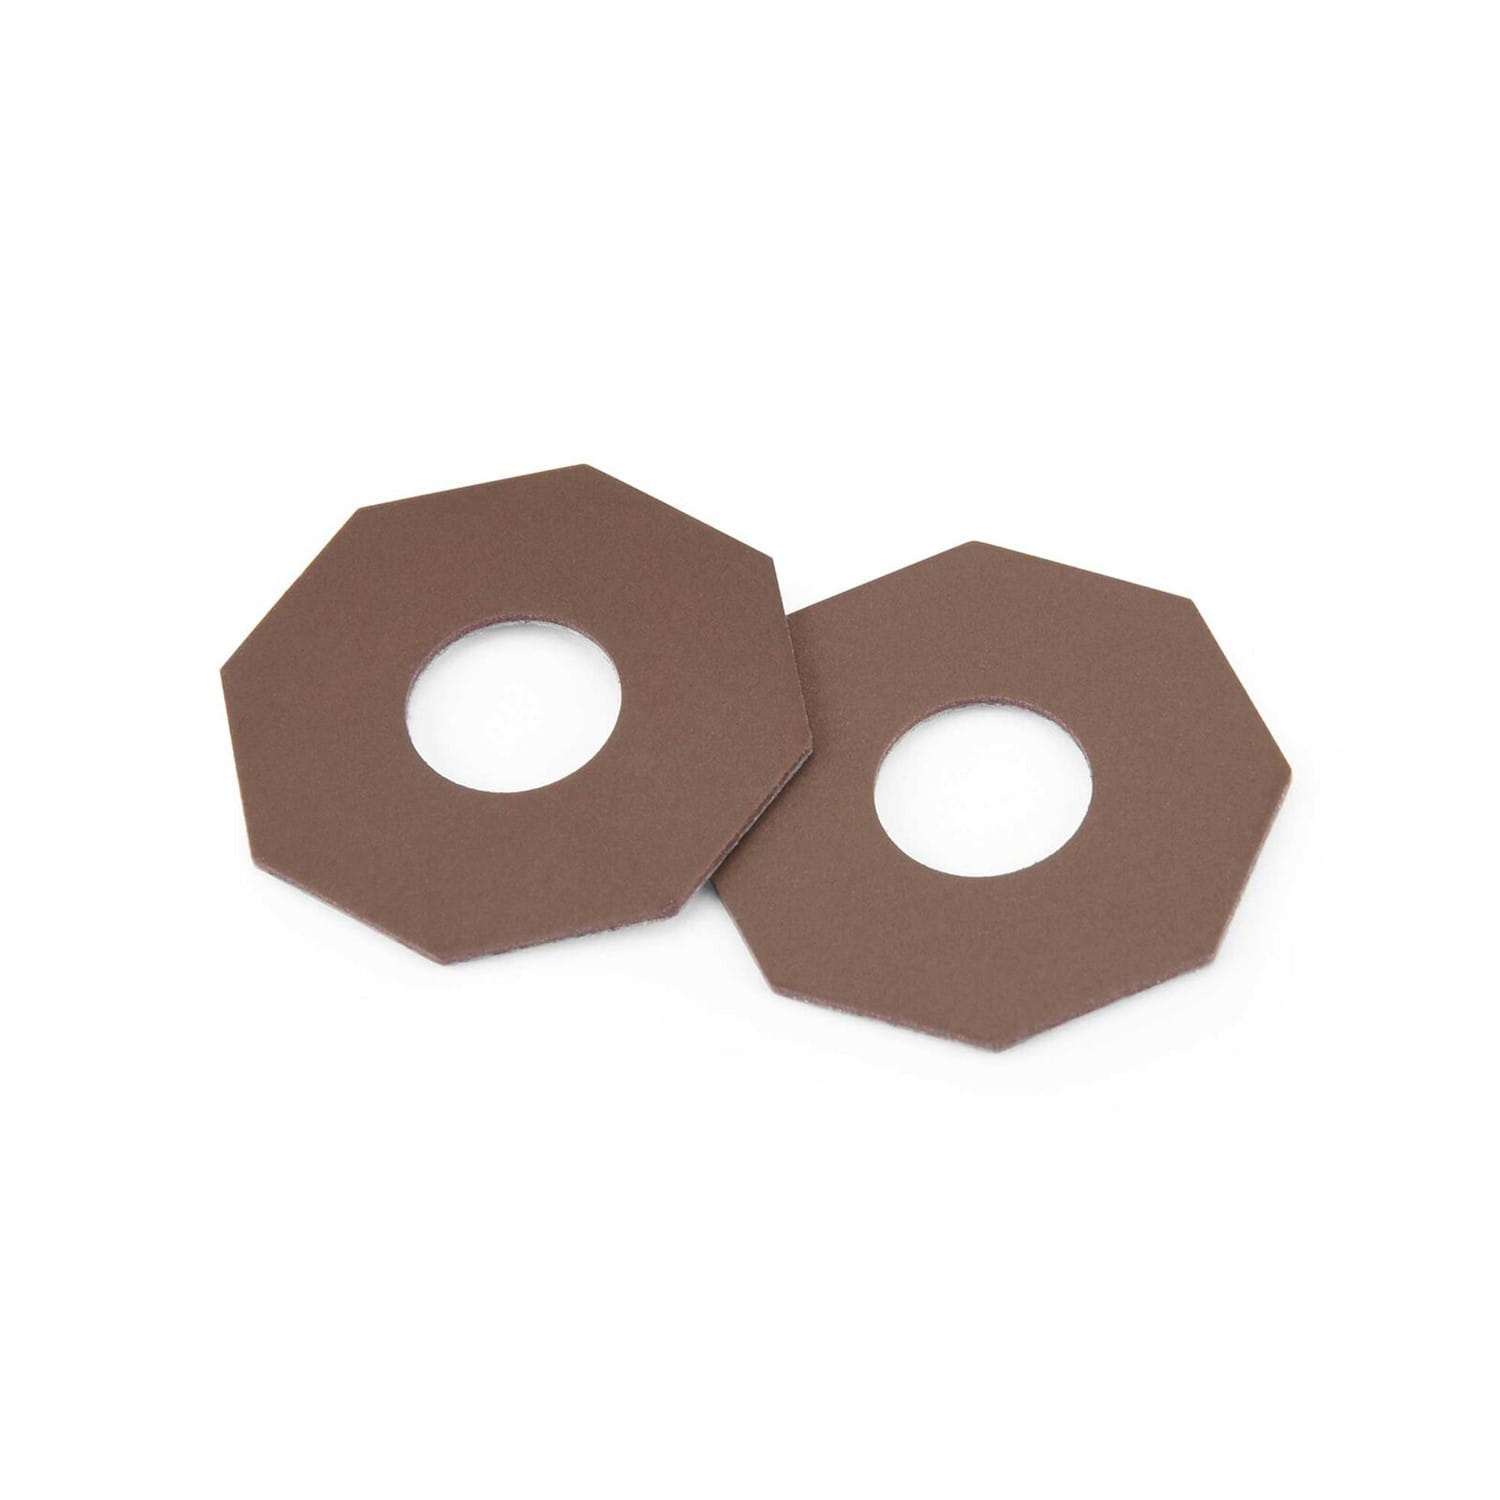 Proline Replacement Slipper Pads for 6350-00